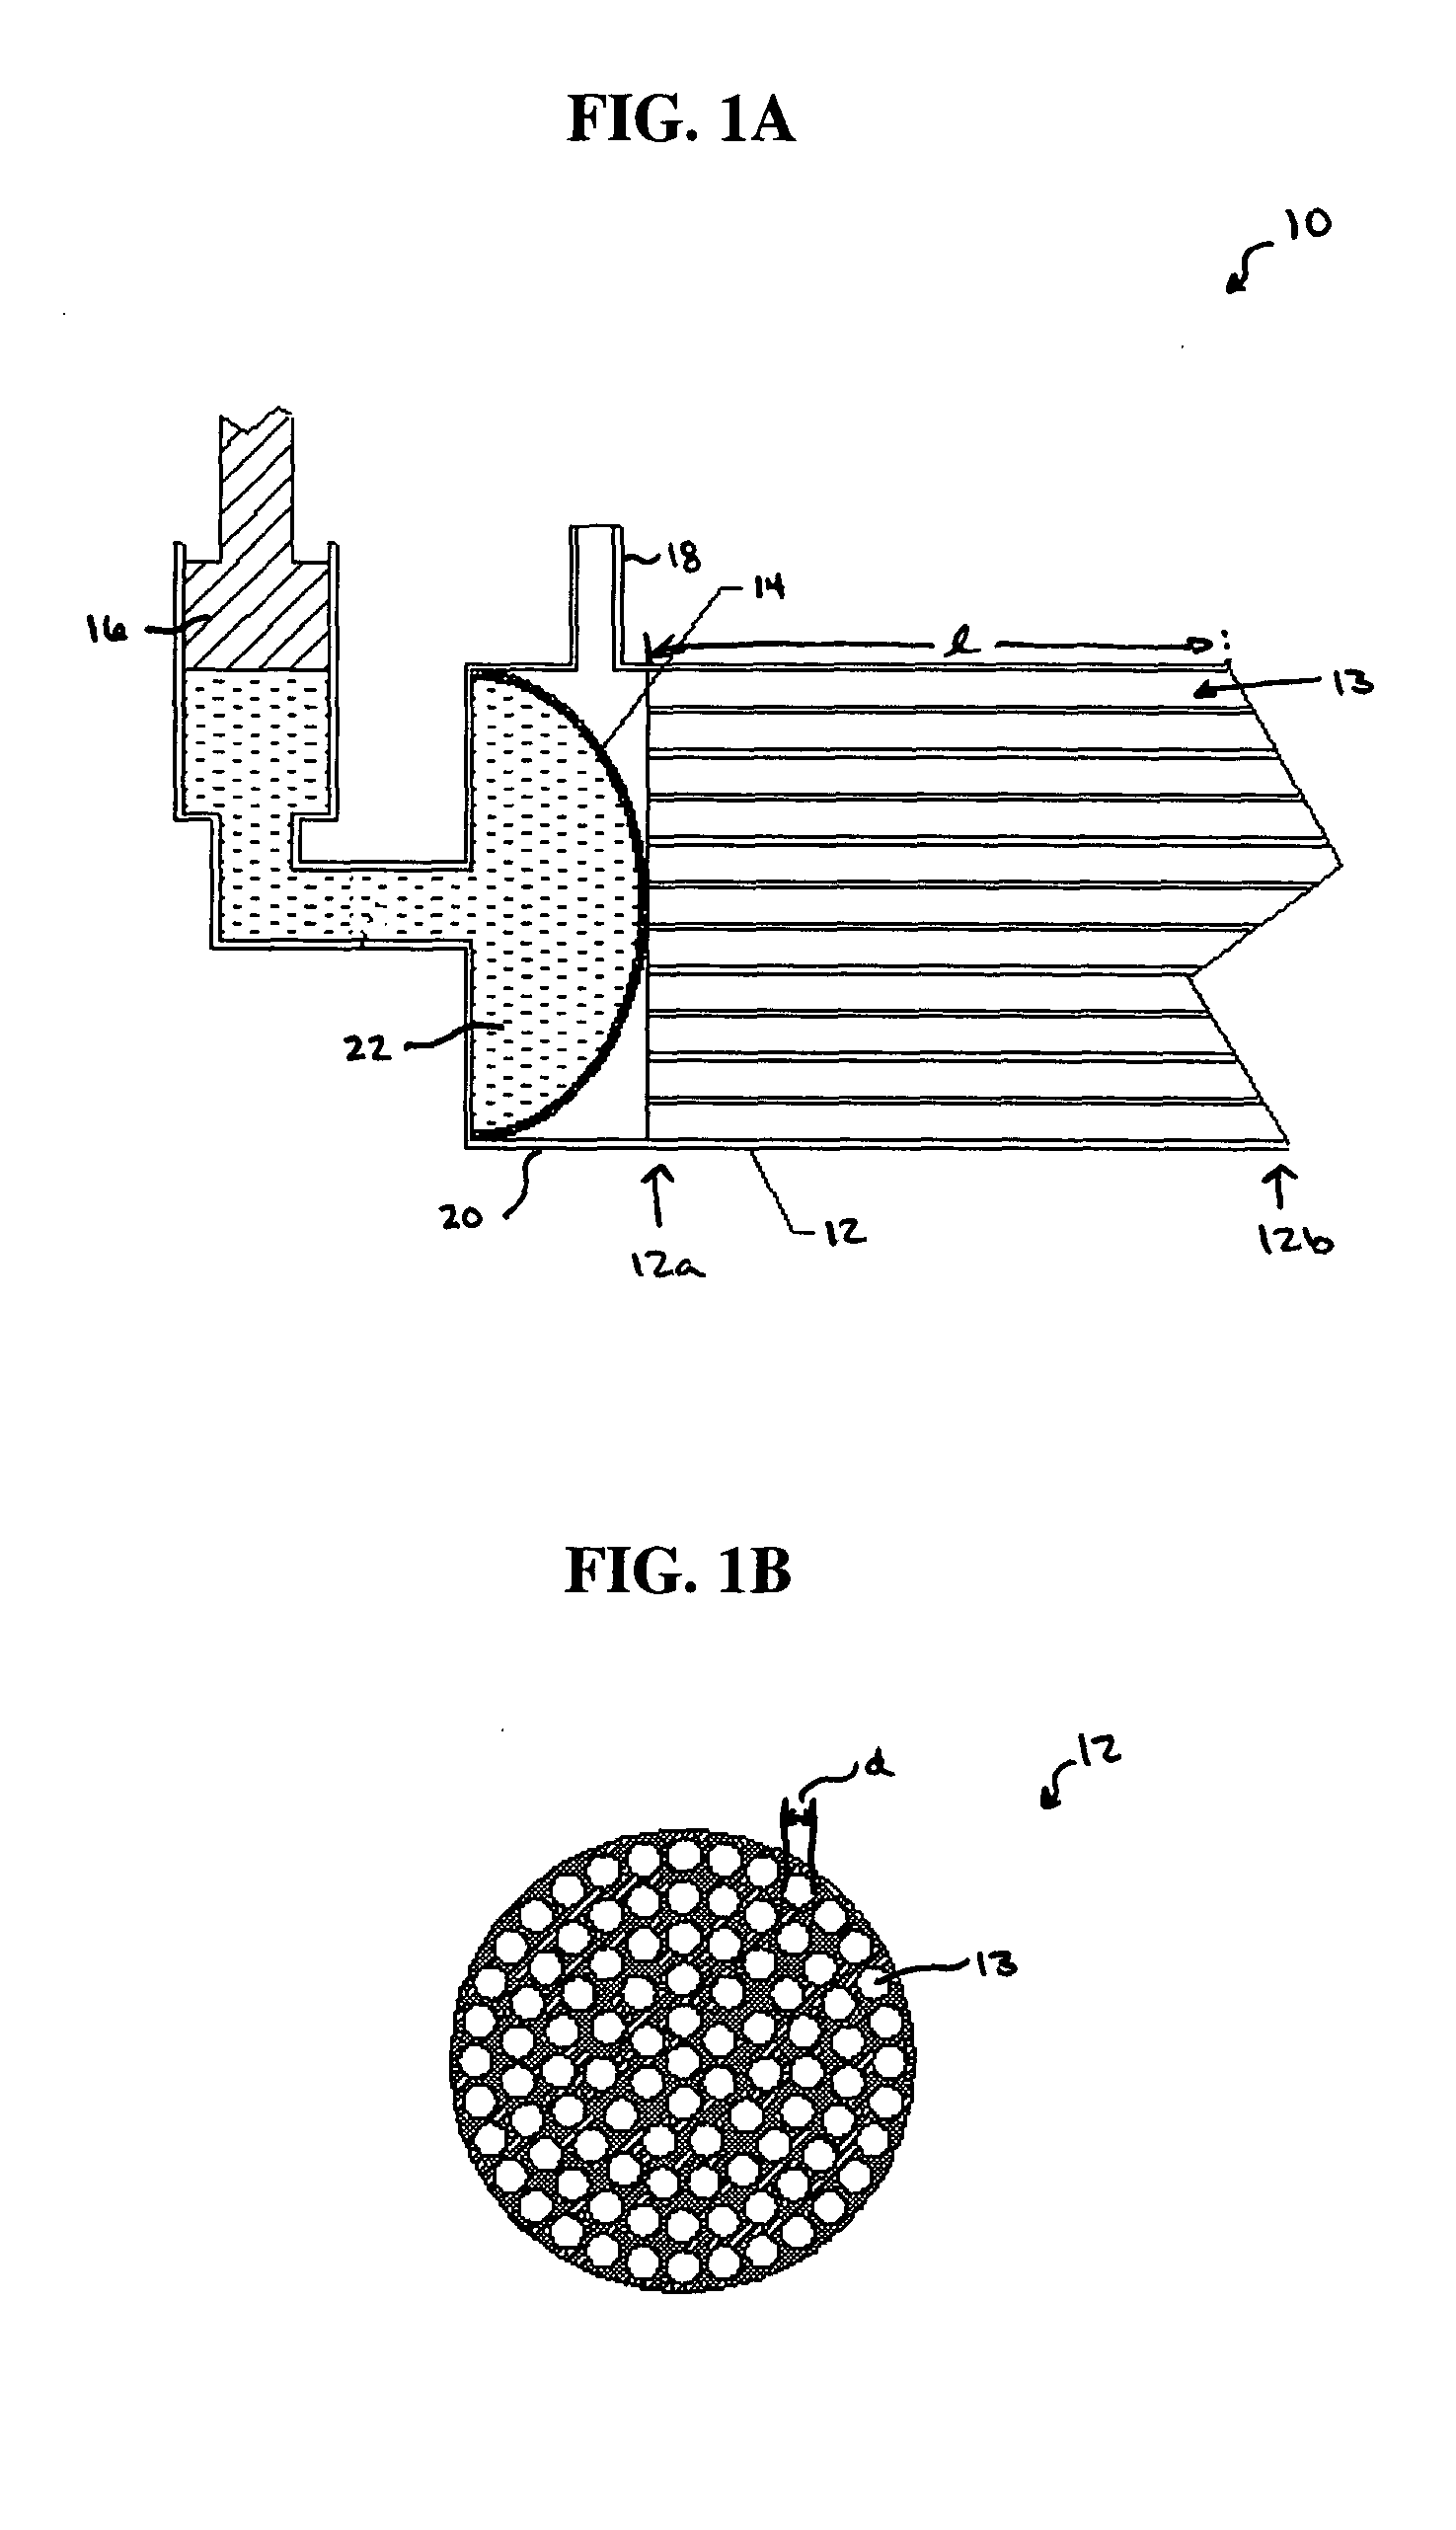 Implantable pump with adjustable flow rate